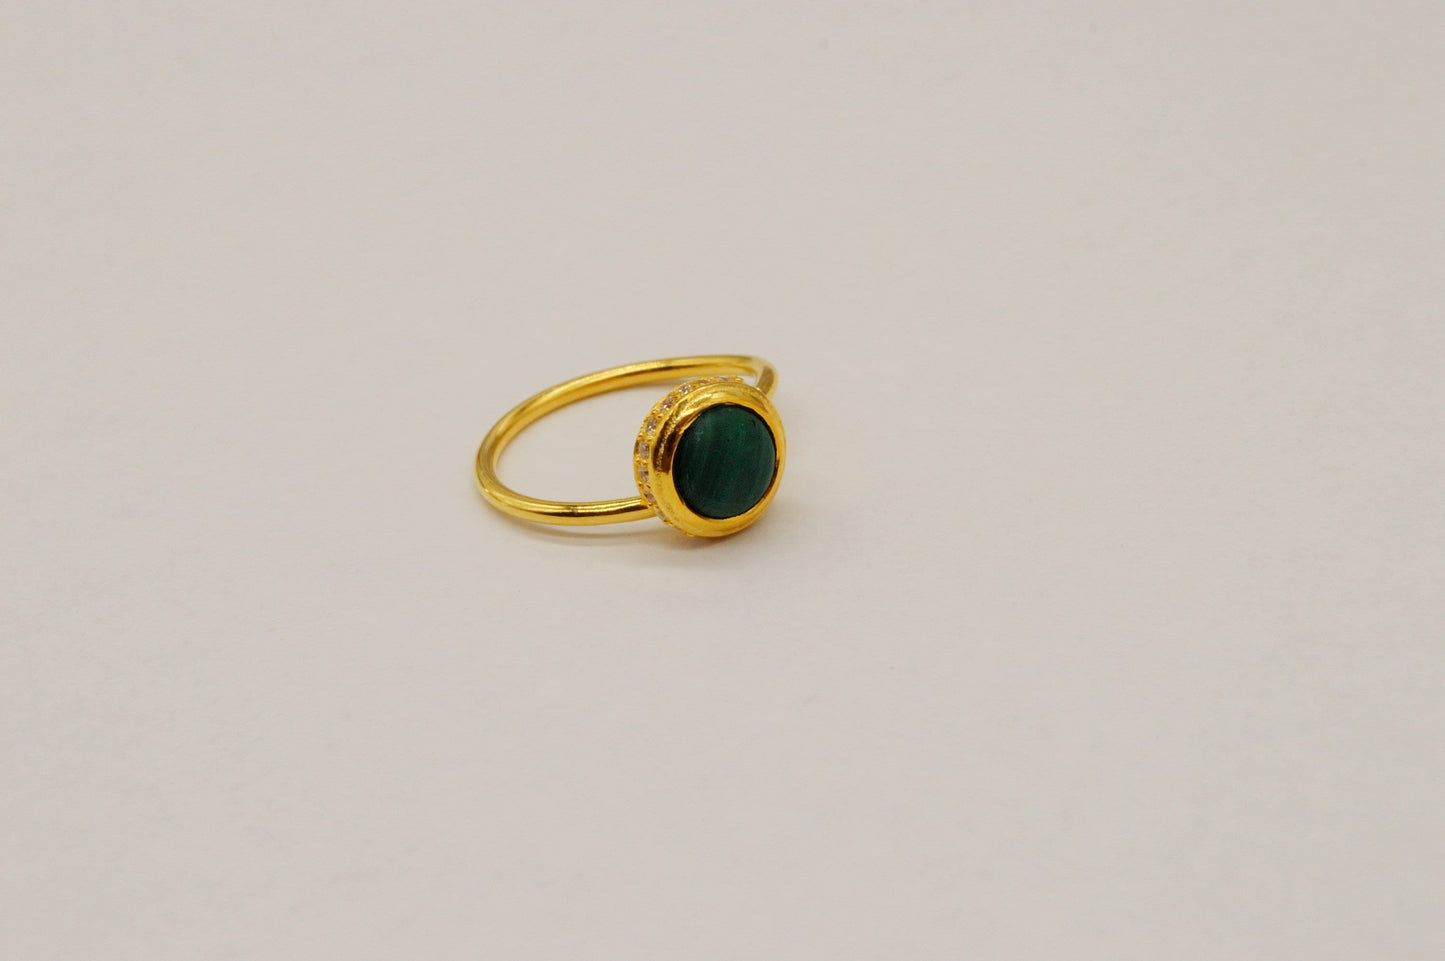 Malachite, Cubic Zirconia Gold Ring, Dainty CZ Ring, Green Gemstone, Malachite Jewelry, Unique Gemstone, Gifts For Her, Rings For Women